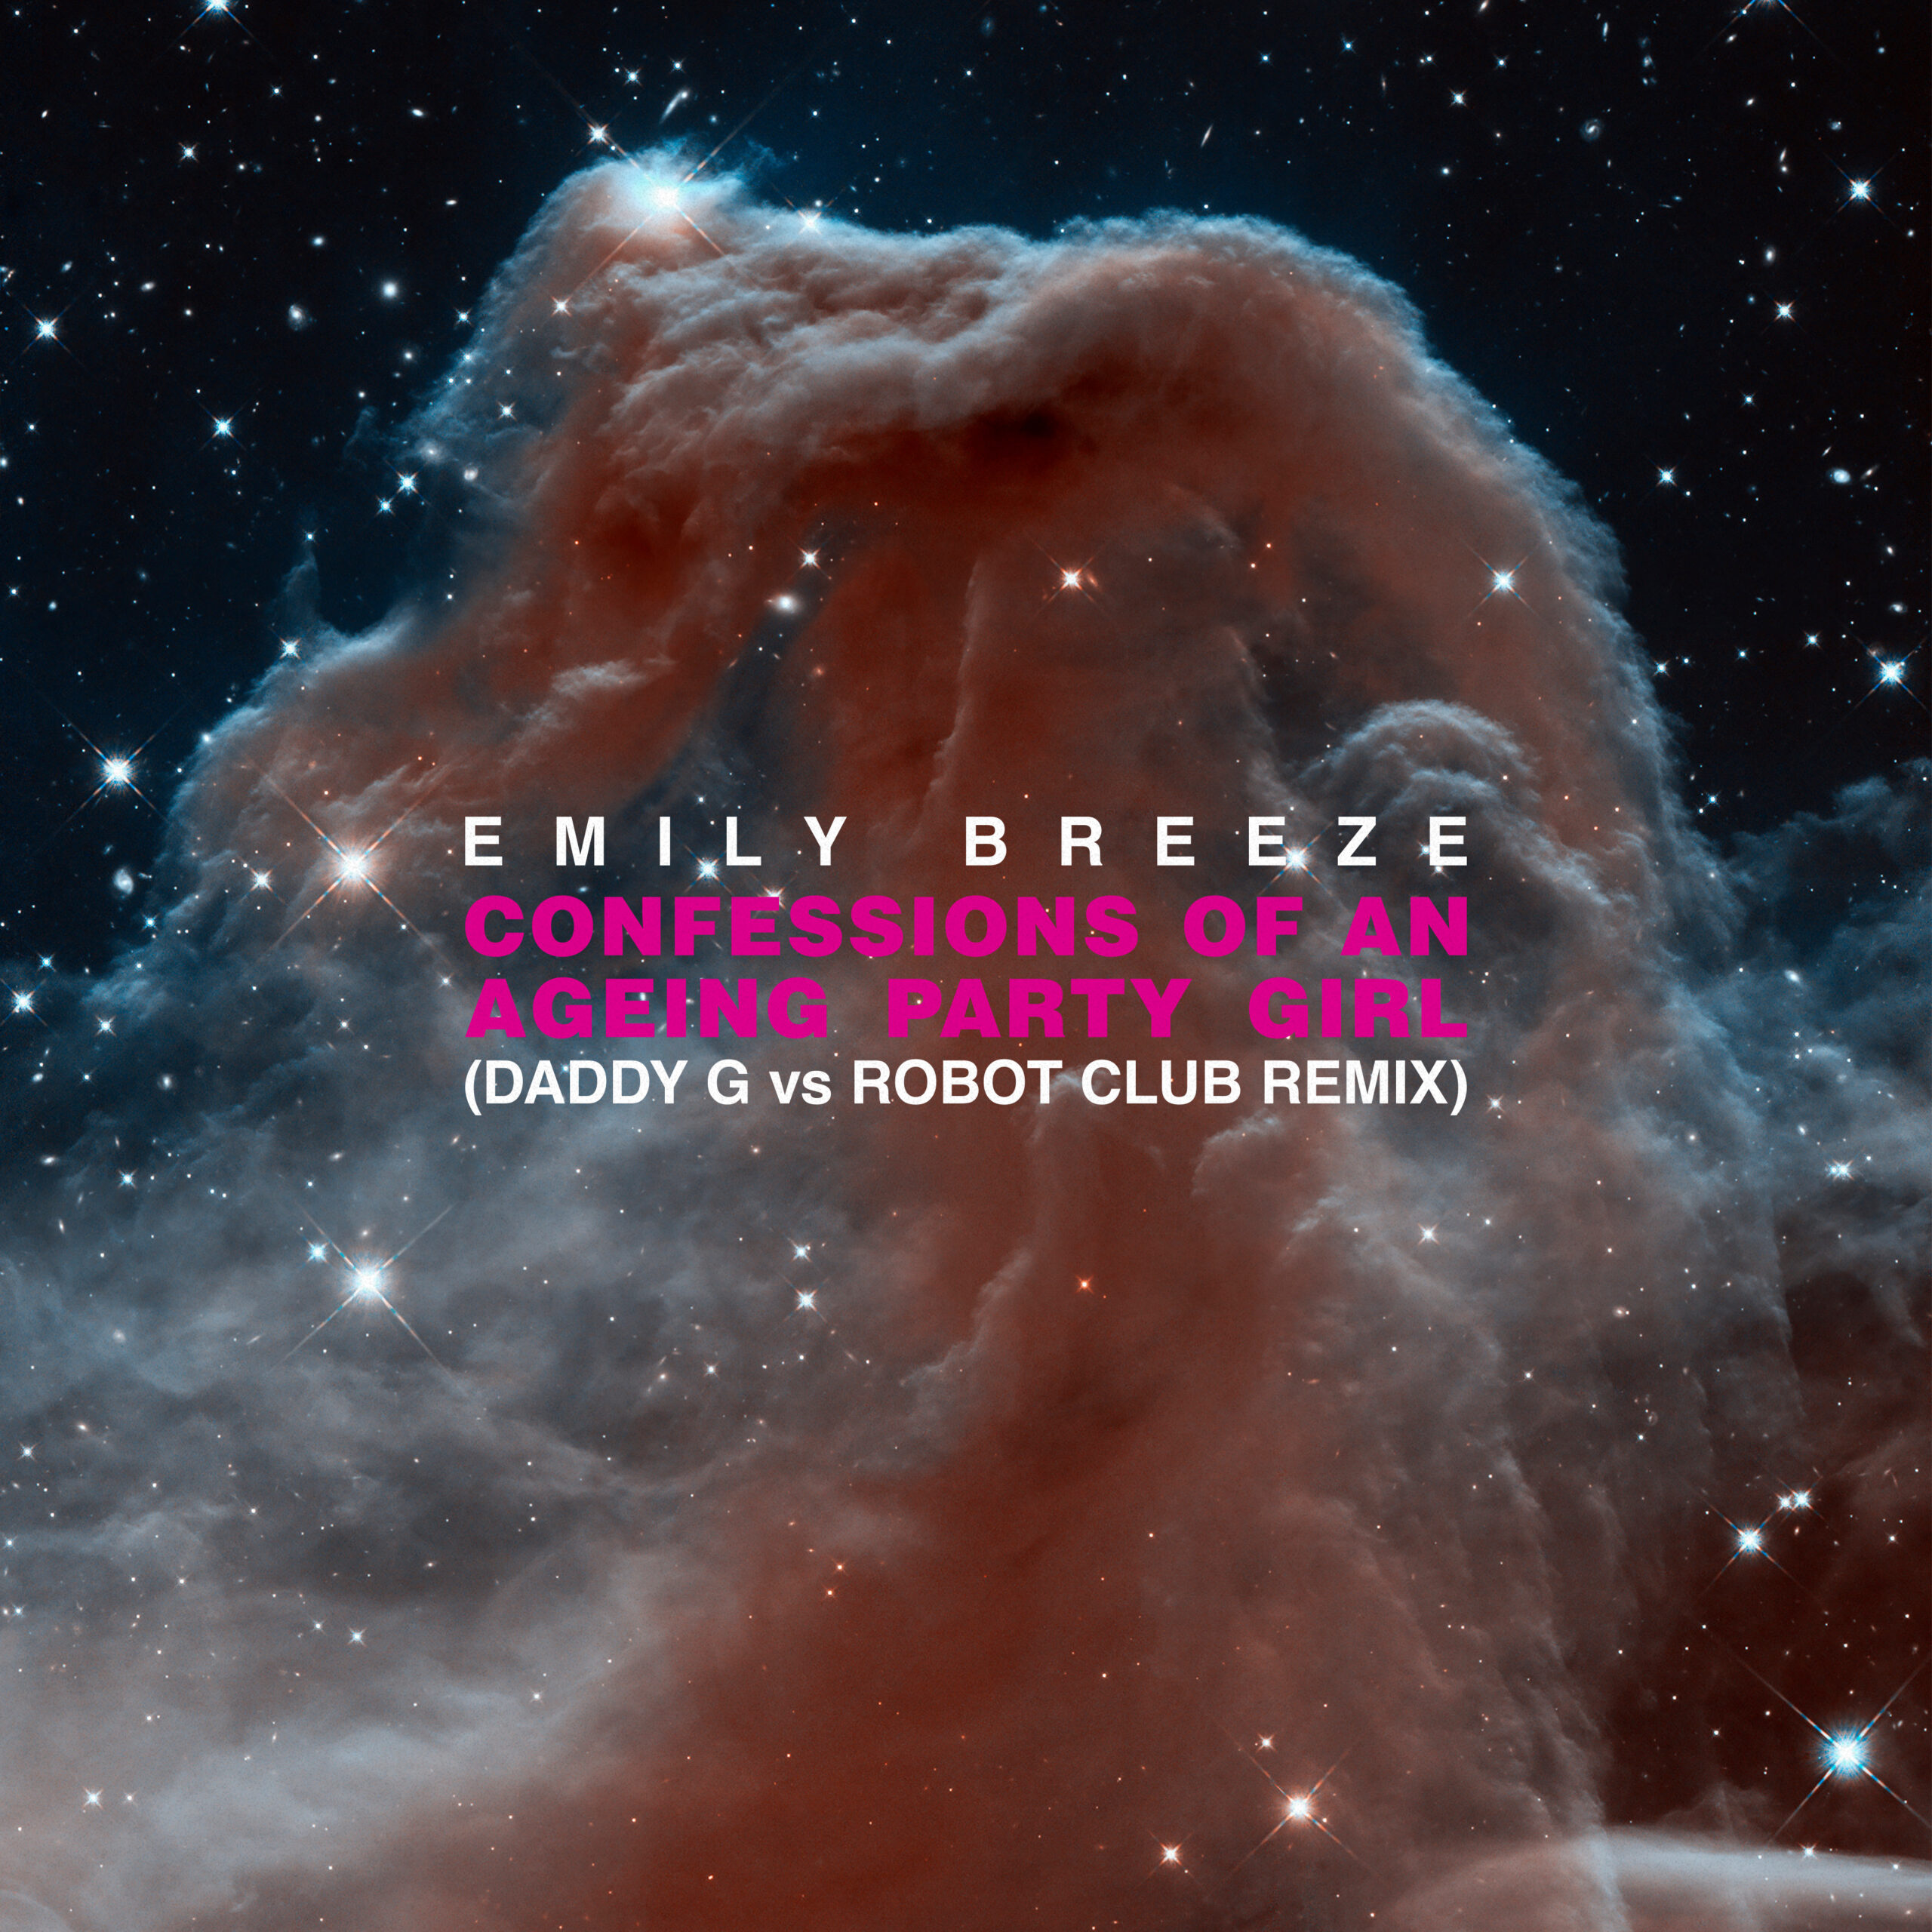 LISTEN | “Confessions of an Ageing Party Girl” (Daddy G vs Robot Club Remix) by Emily Breeze